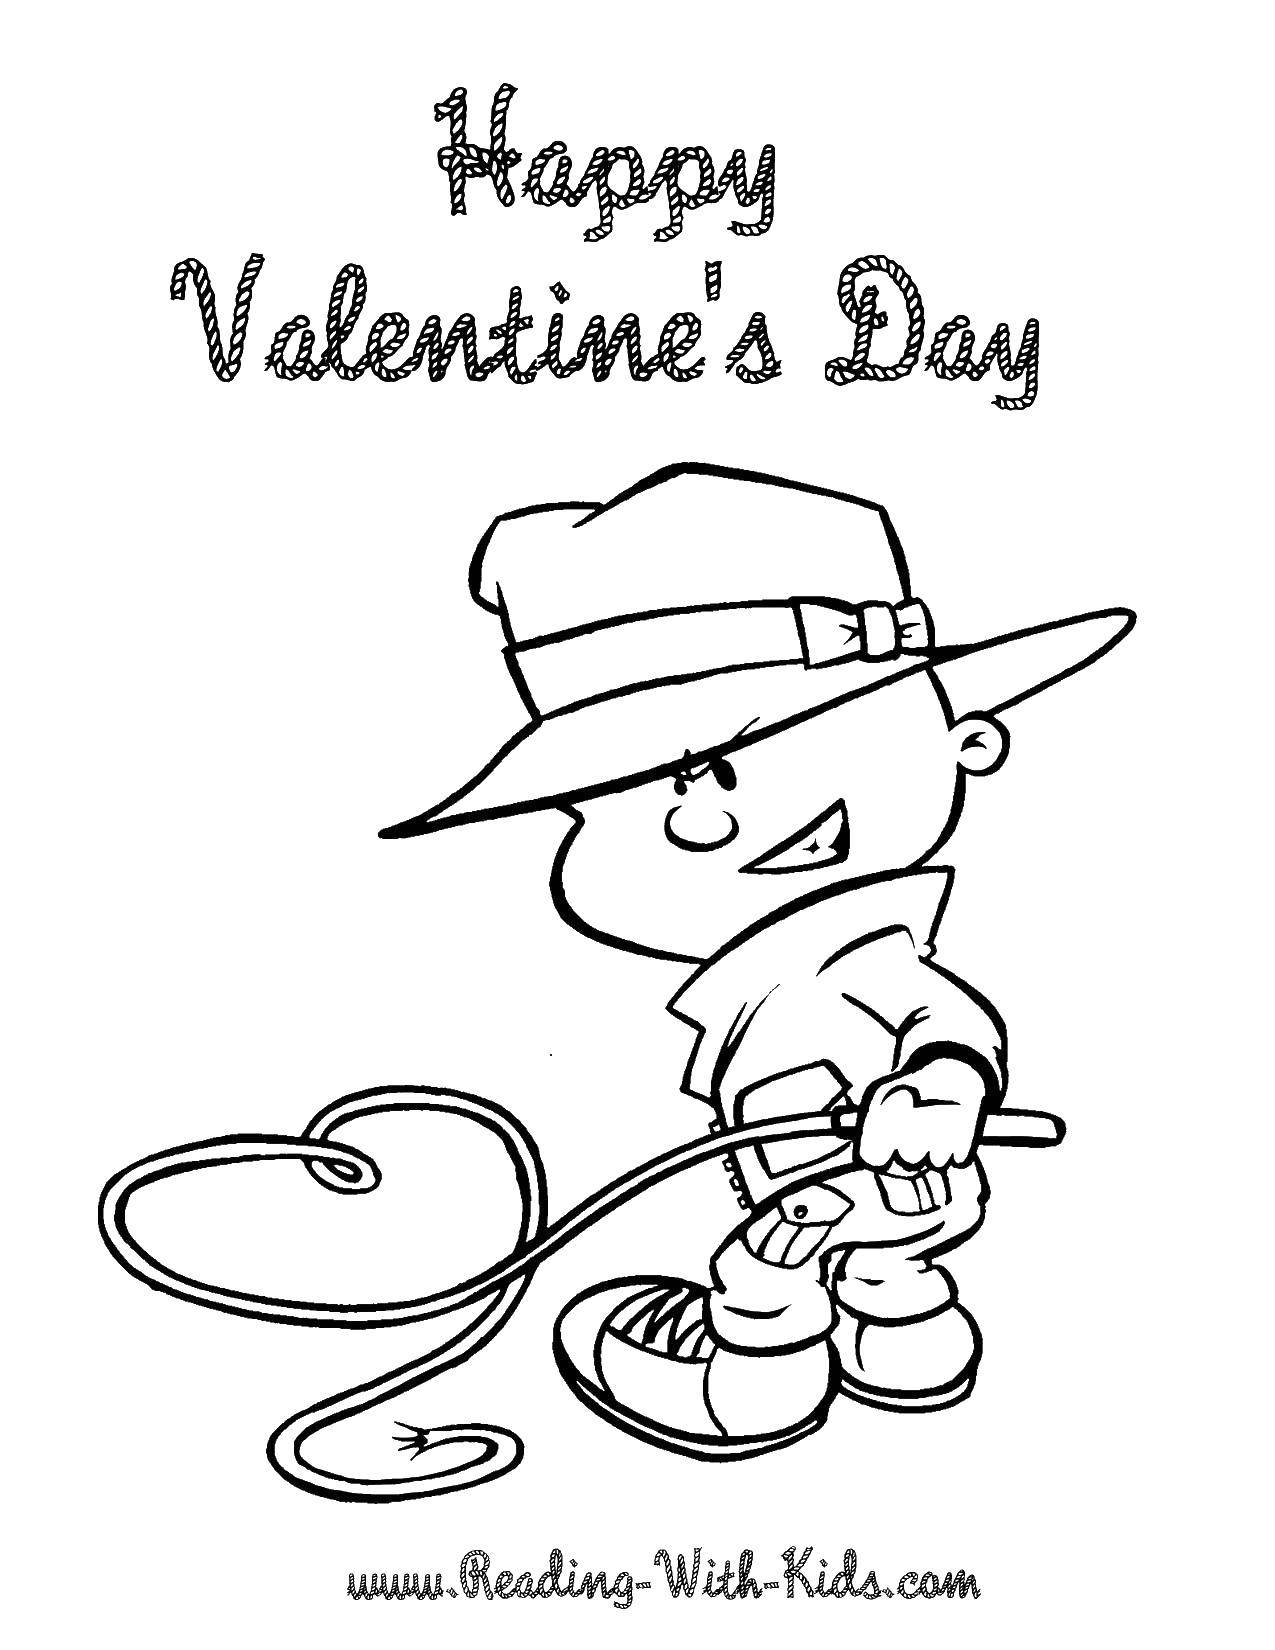 Coloring The boy in the hat. Category Valentines day. Tags:  boy, hat, whip.